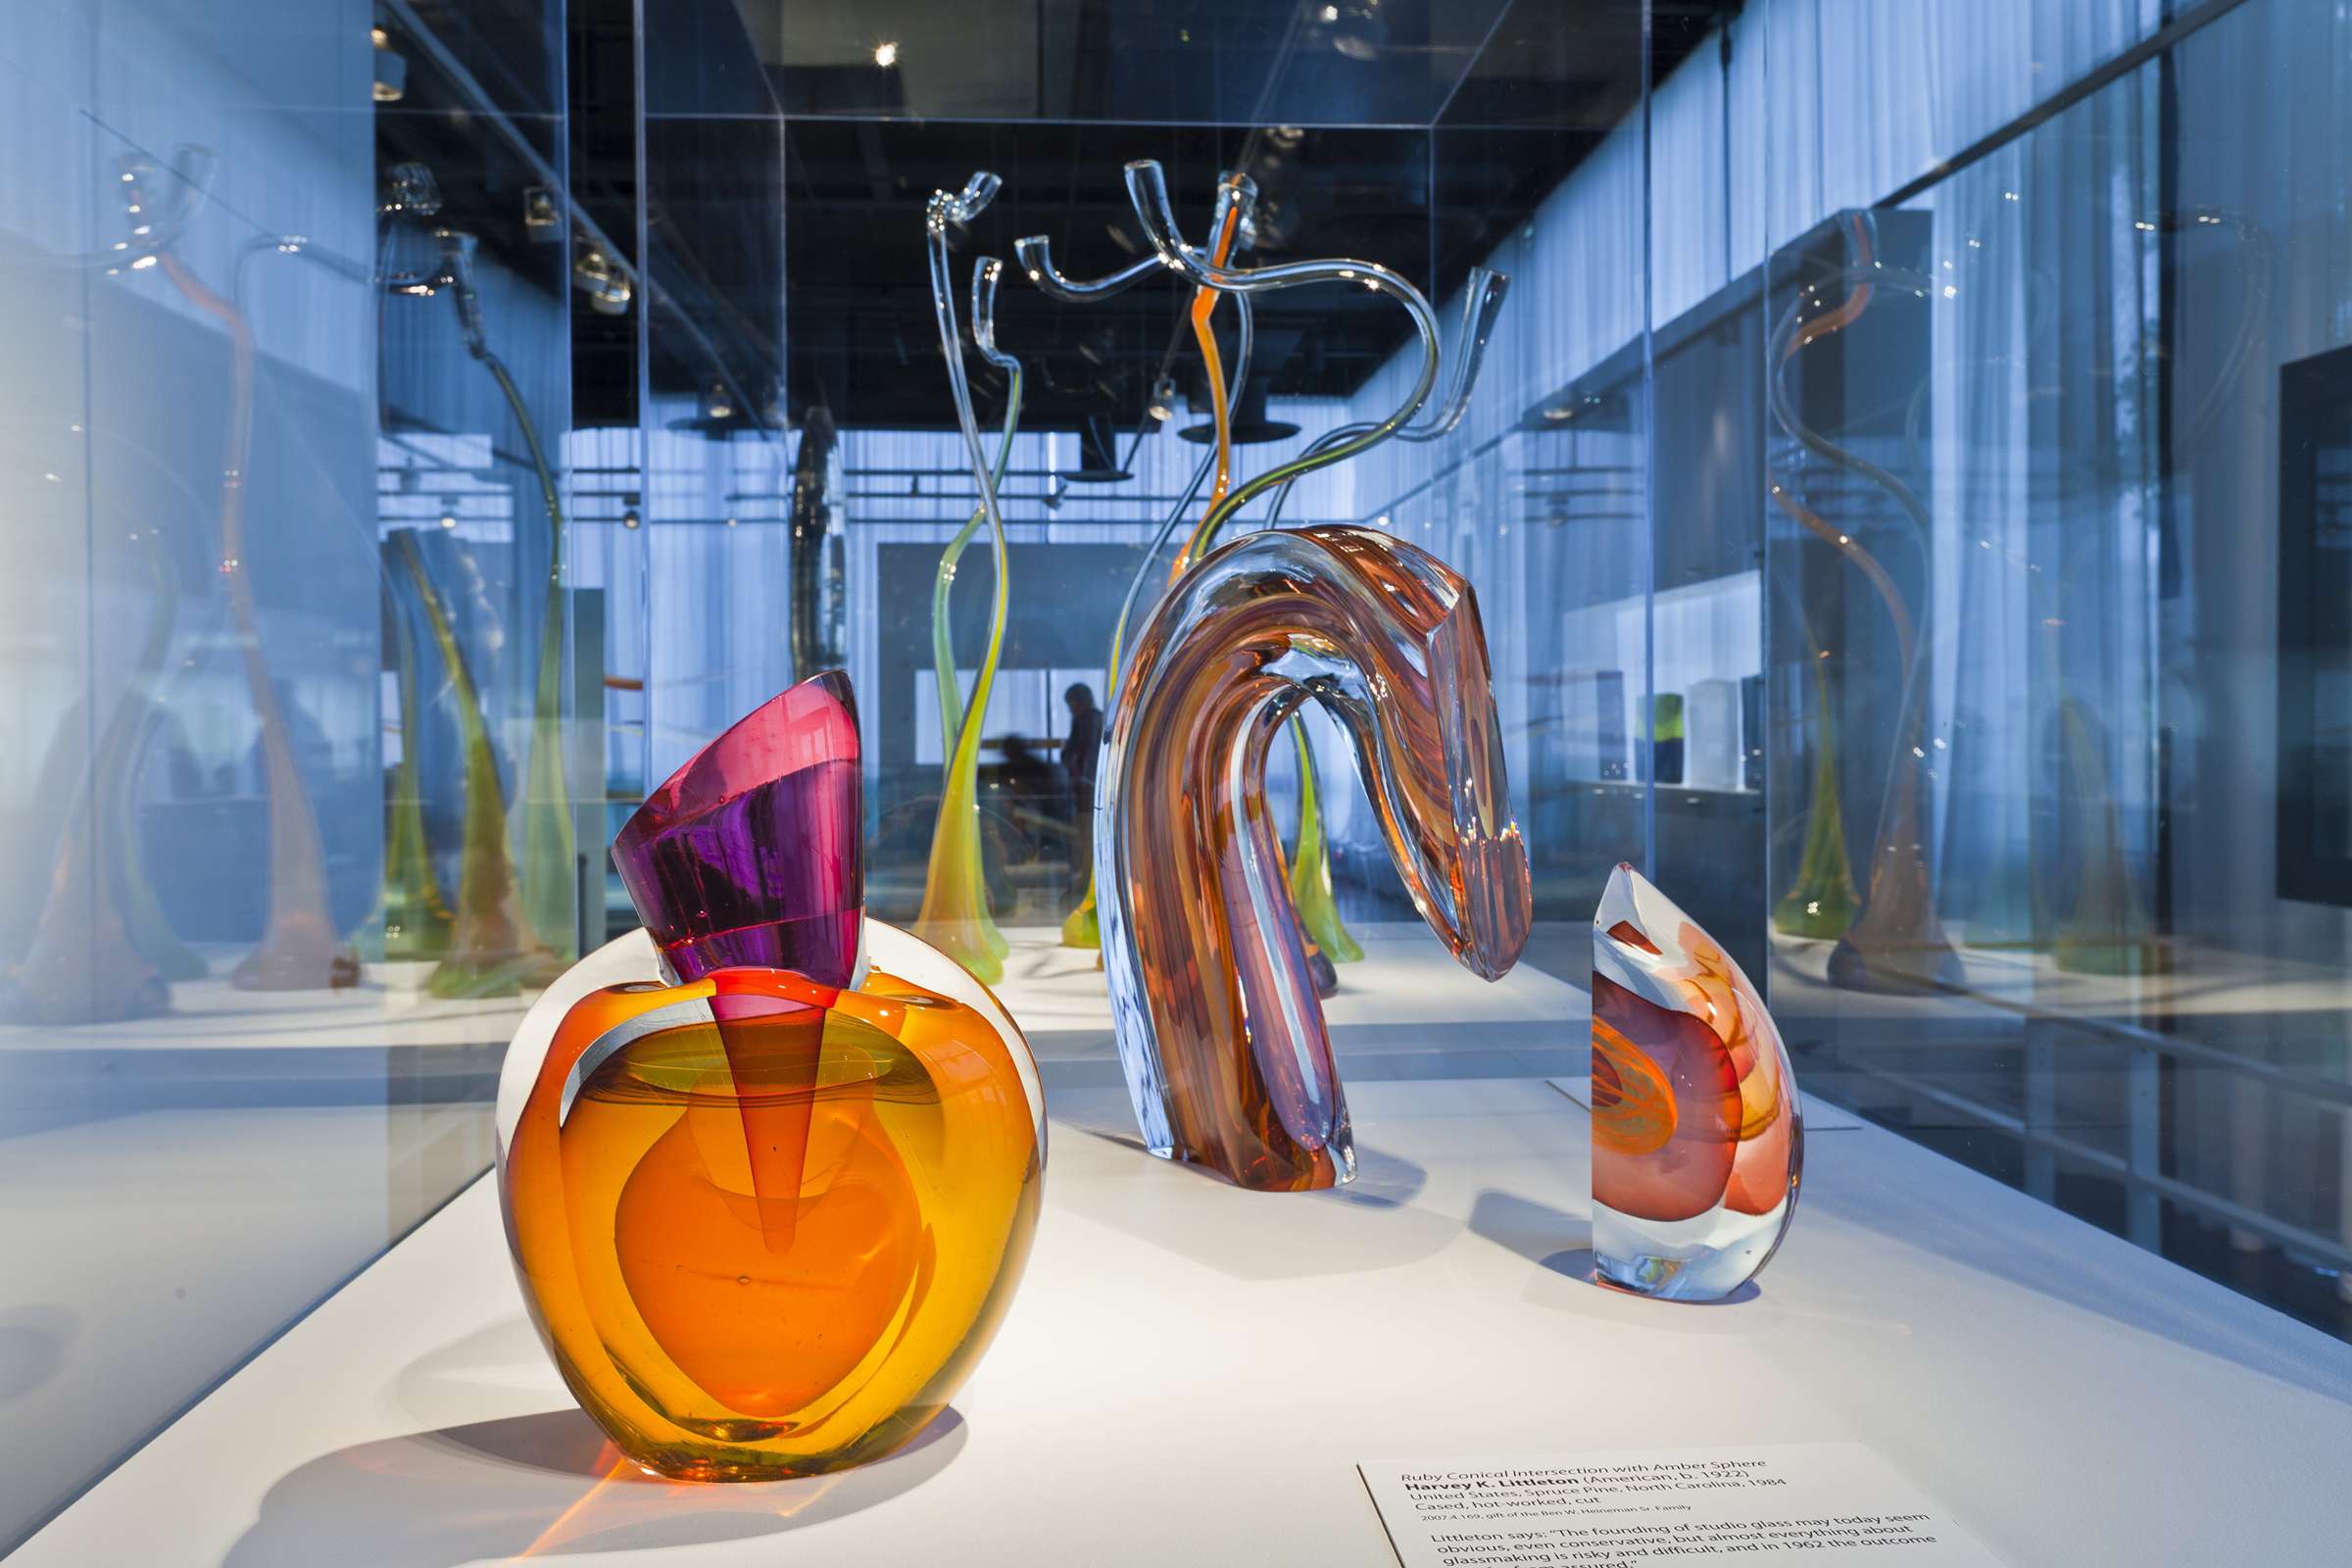 CORNING MUSEUM OF GLASS: OCTOBER 11, 2020